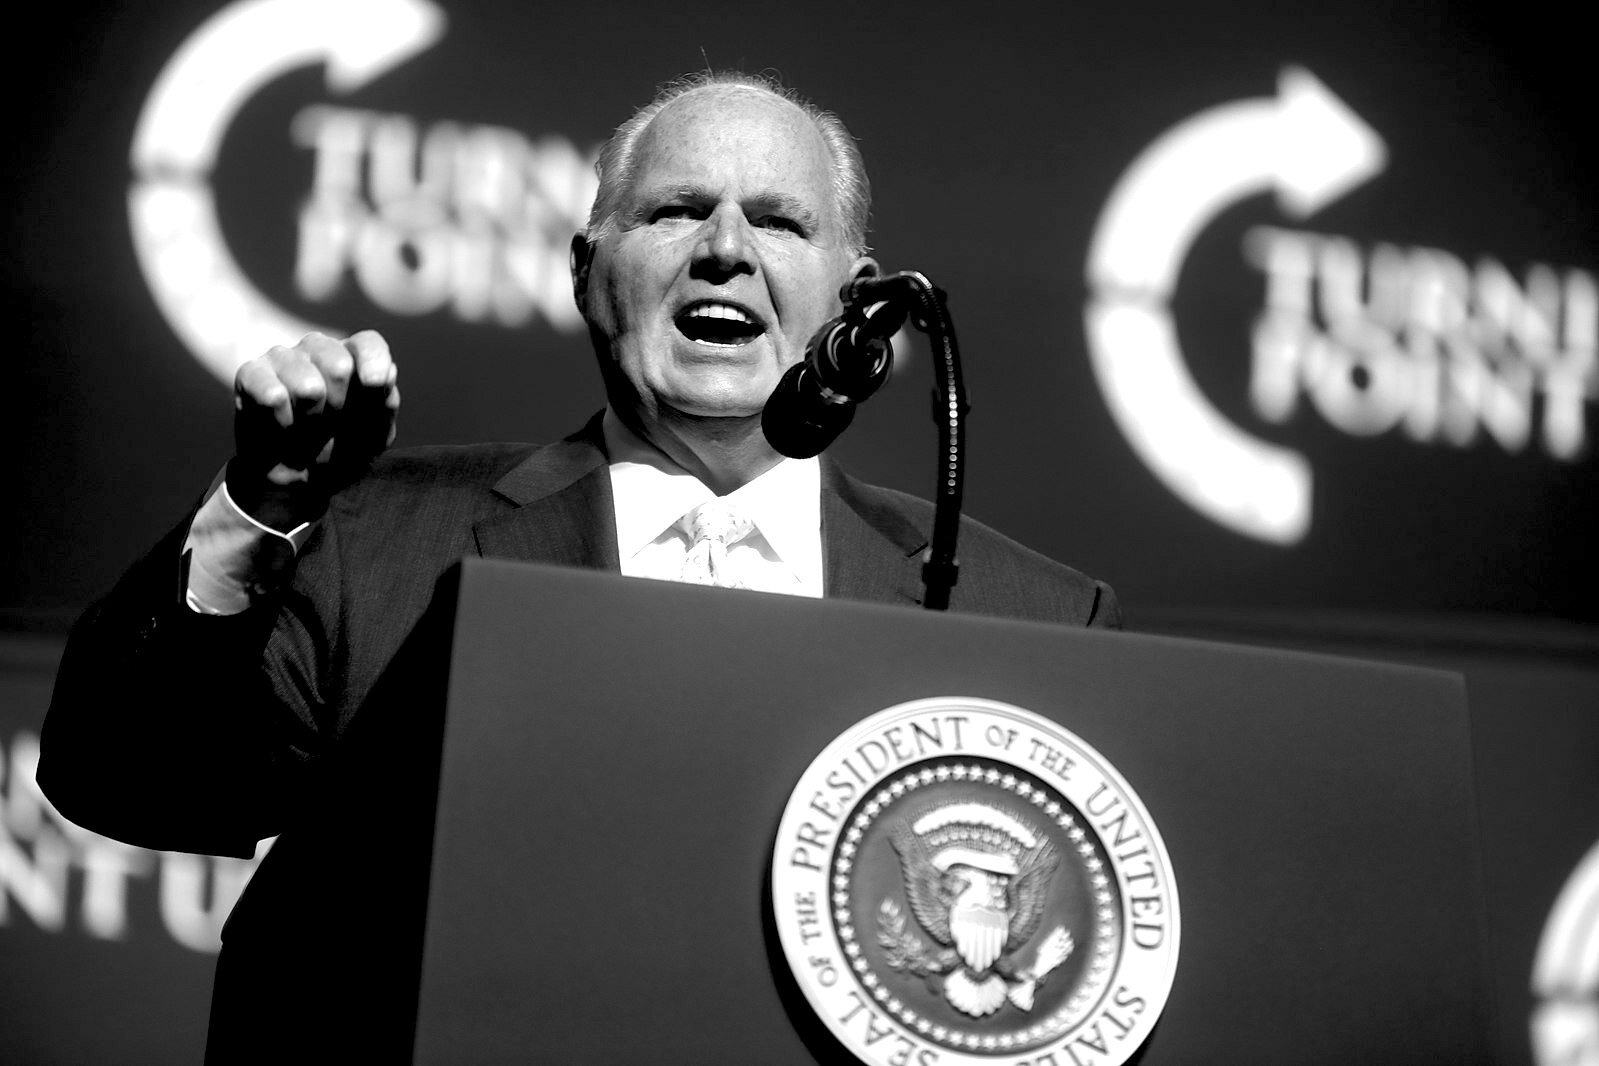 December 21, 2019 – Rush Limbaugh speaking with attendees at the 2019 Student Action Summit hosted by Turning Point USA at the Palm Beach County Convention Center in West Palm Beach, Florida. (Photo by Gage Skidmore | Wikimedia Commons)